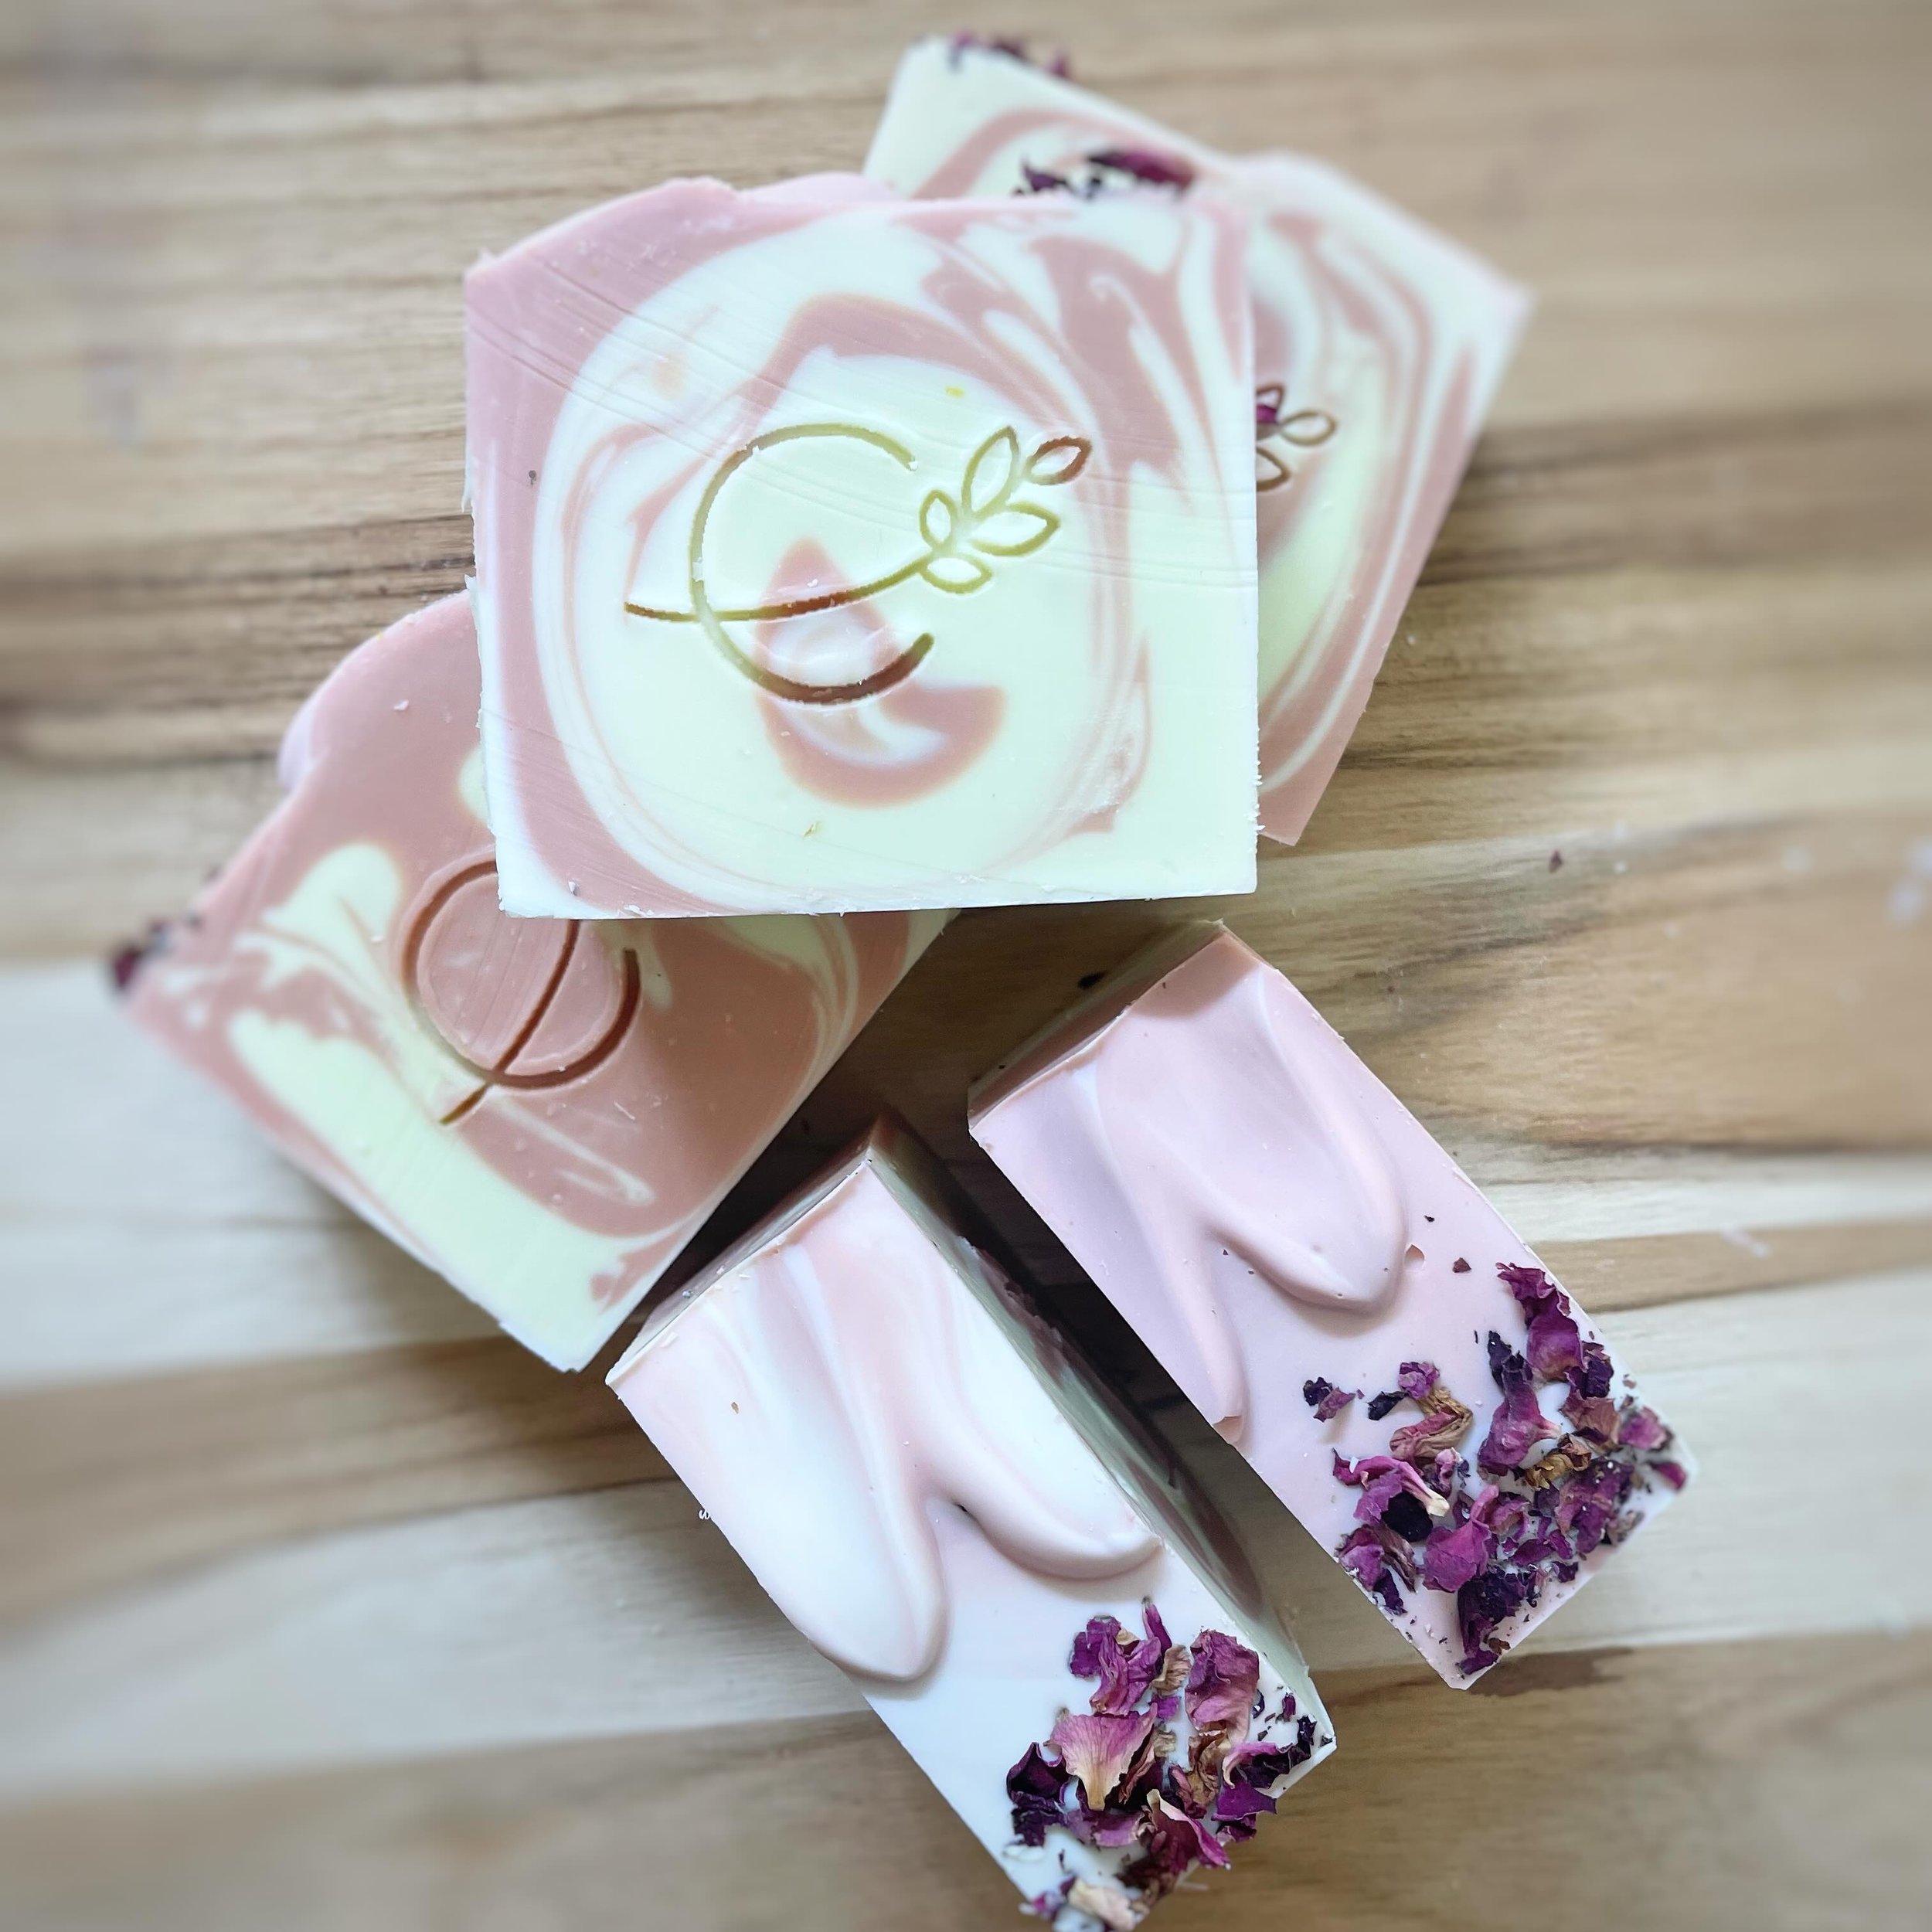 We&rsquo;ve got the perfect gift for mom this Mother&rsquo;s Day! 🌸 
Everyone loves our Lavender Rose soap. As our most popular scent offering, this soap is loaded with pure essential oils &amp; natural clays to give you that perfect, moisturizing c